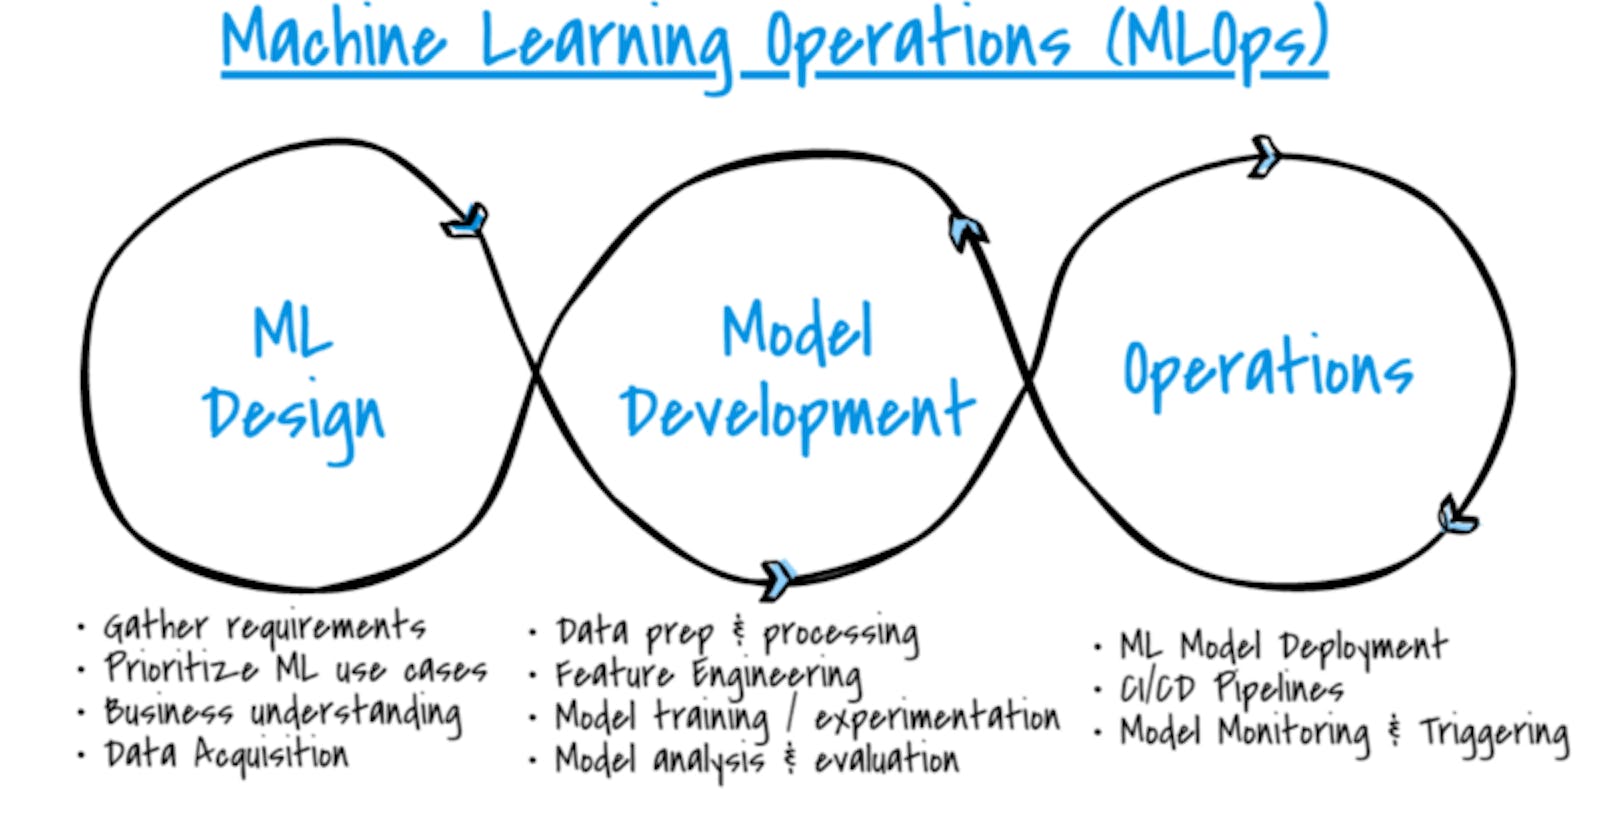 Introduction to ML Ops